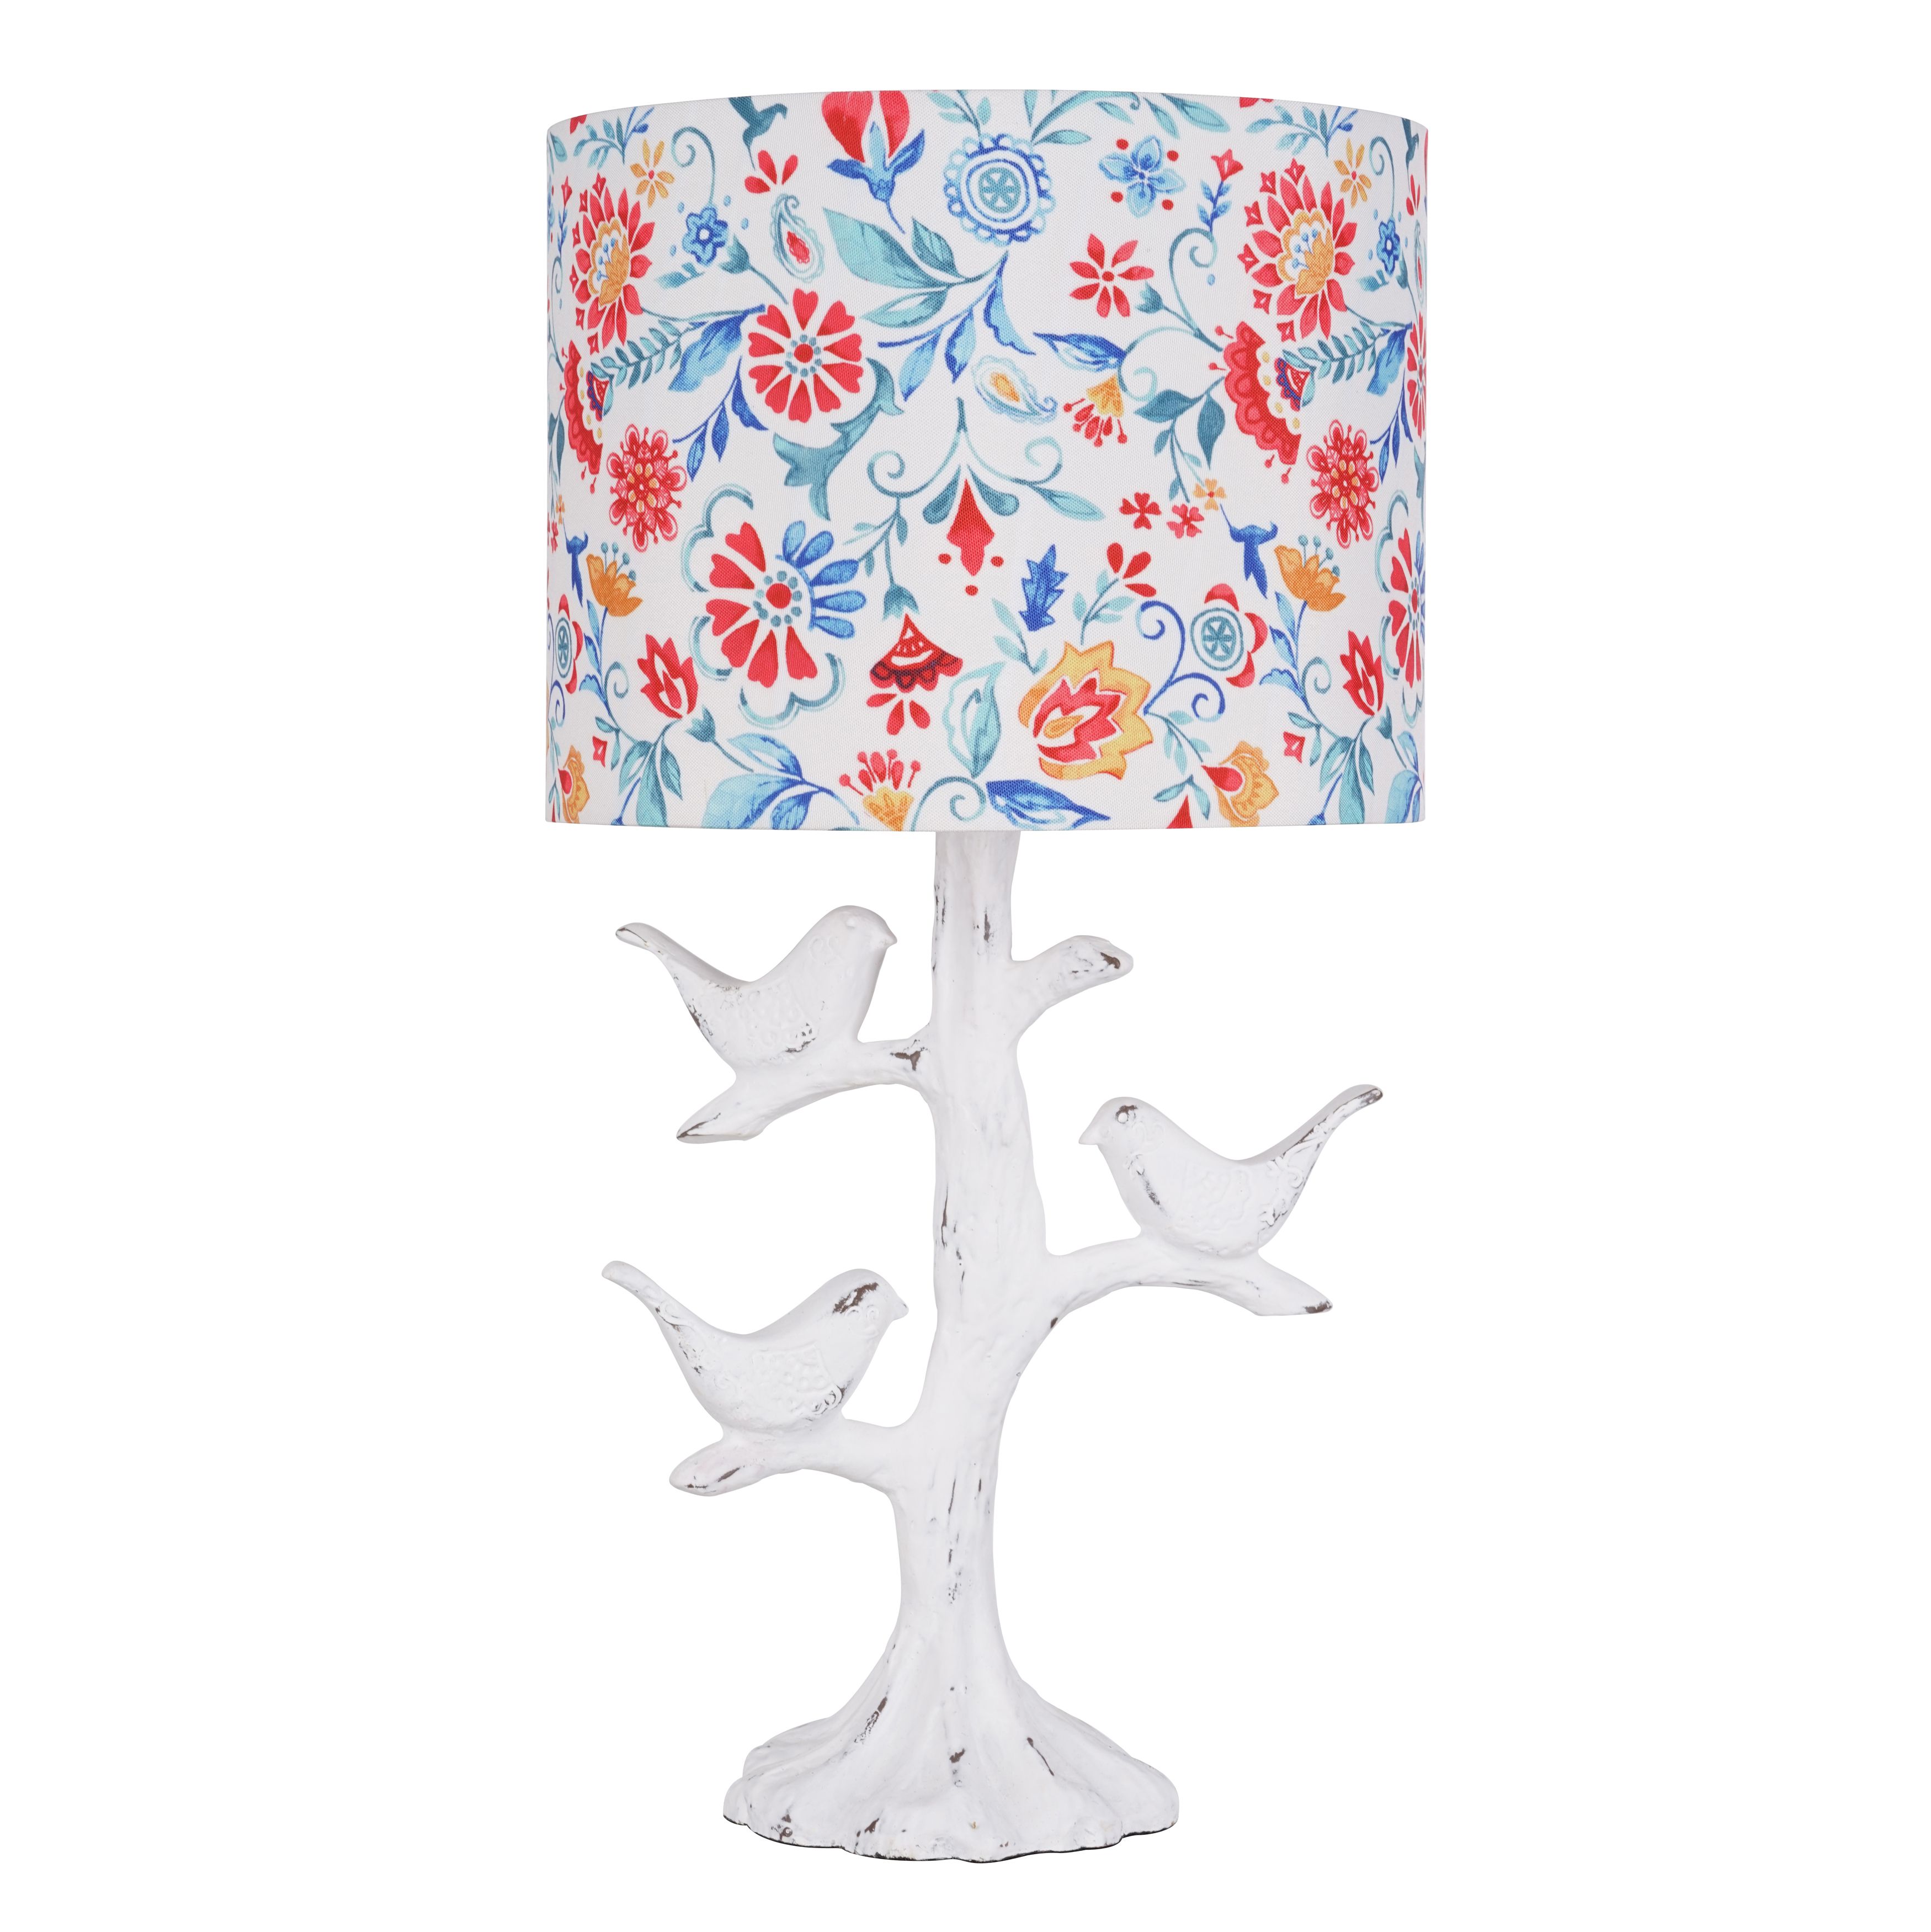 The Pioneer Woman Mazie Birds Table Lamp with Linen Shade